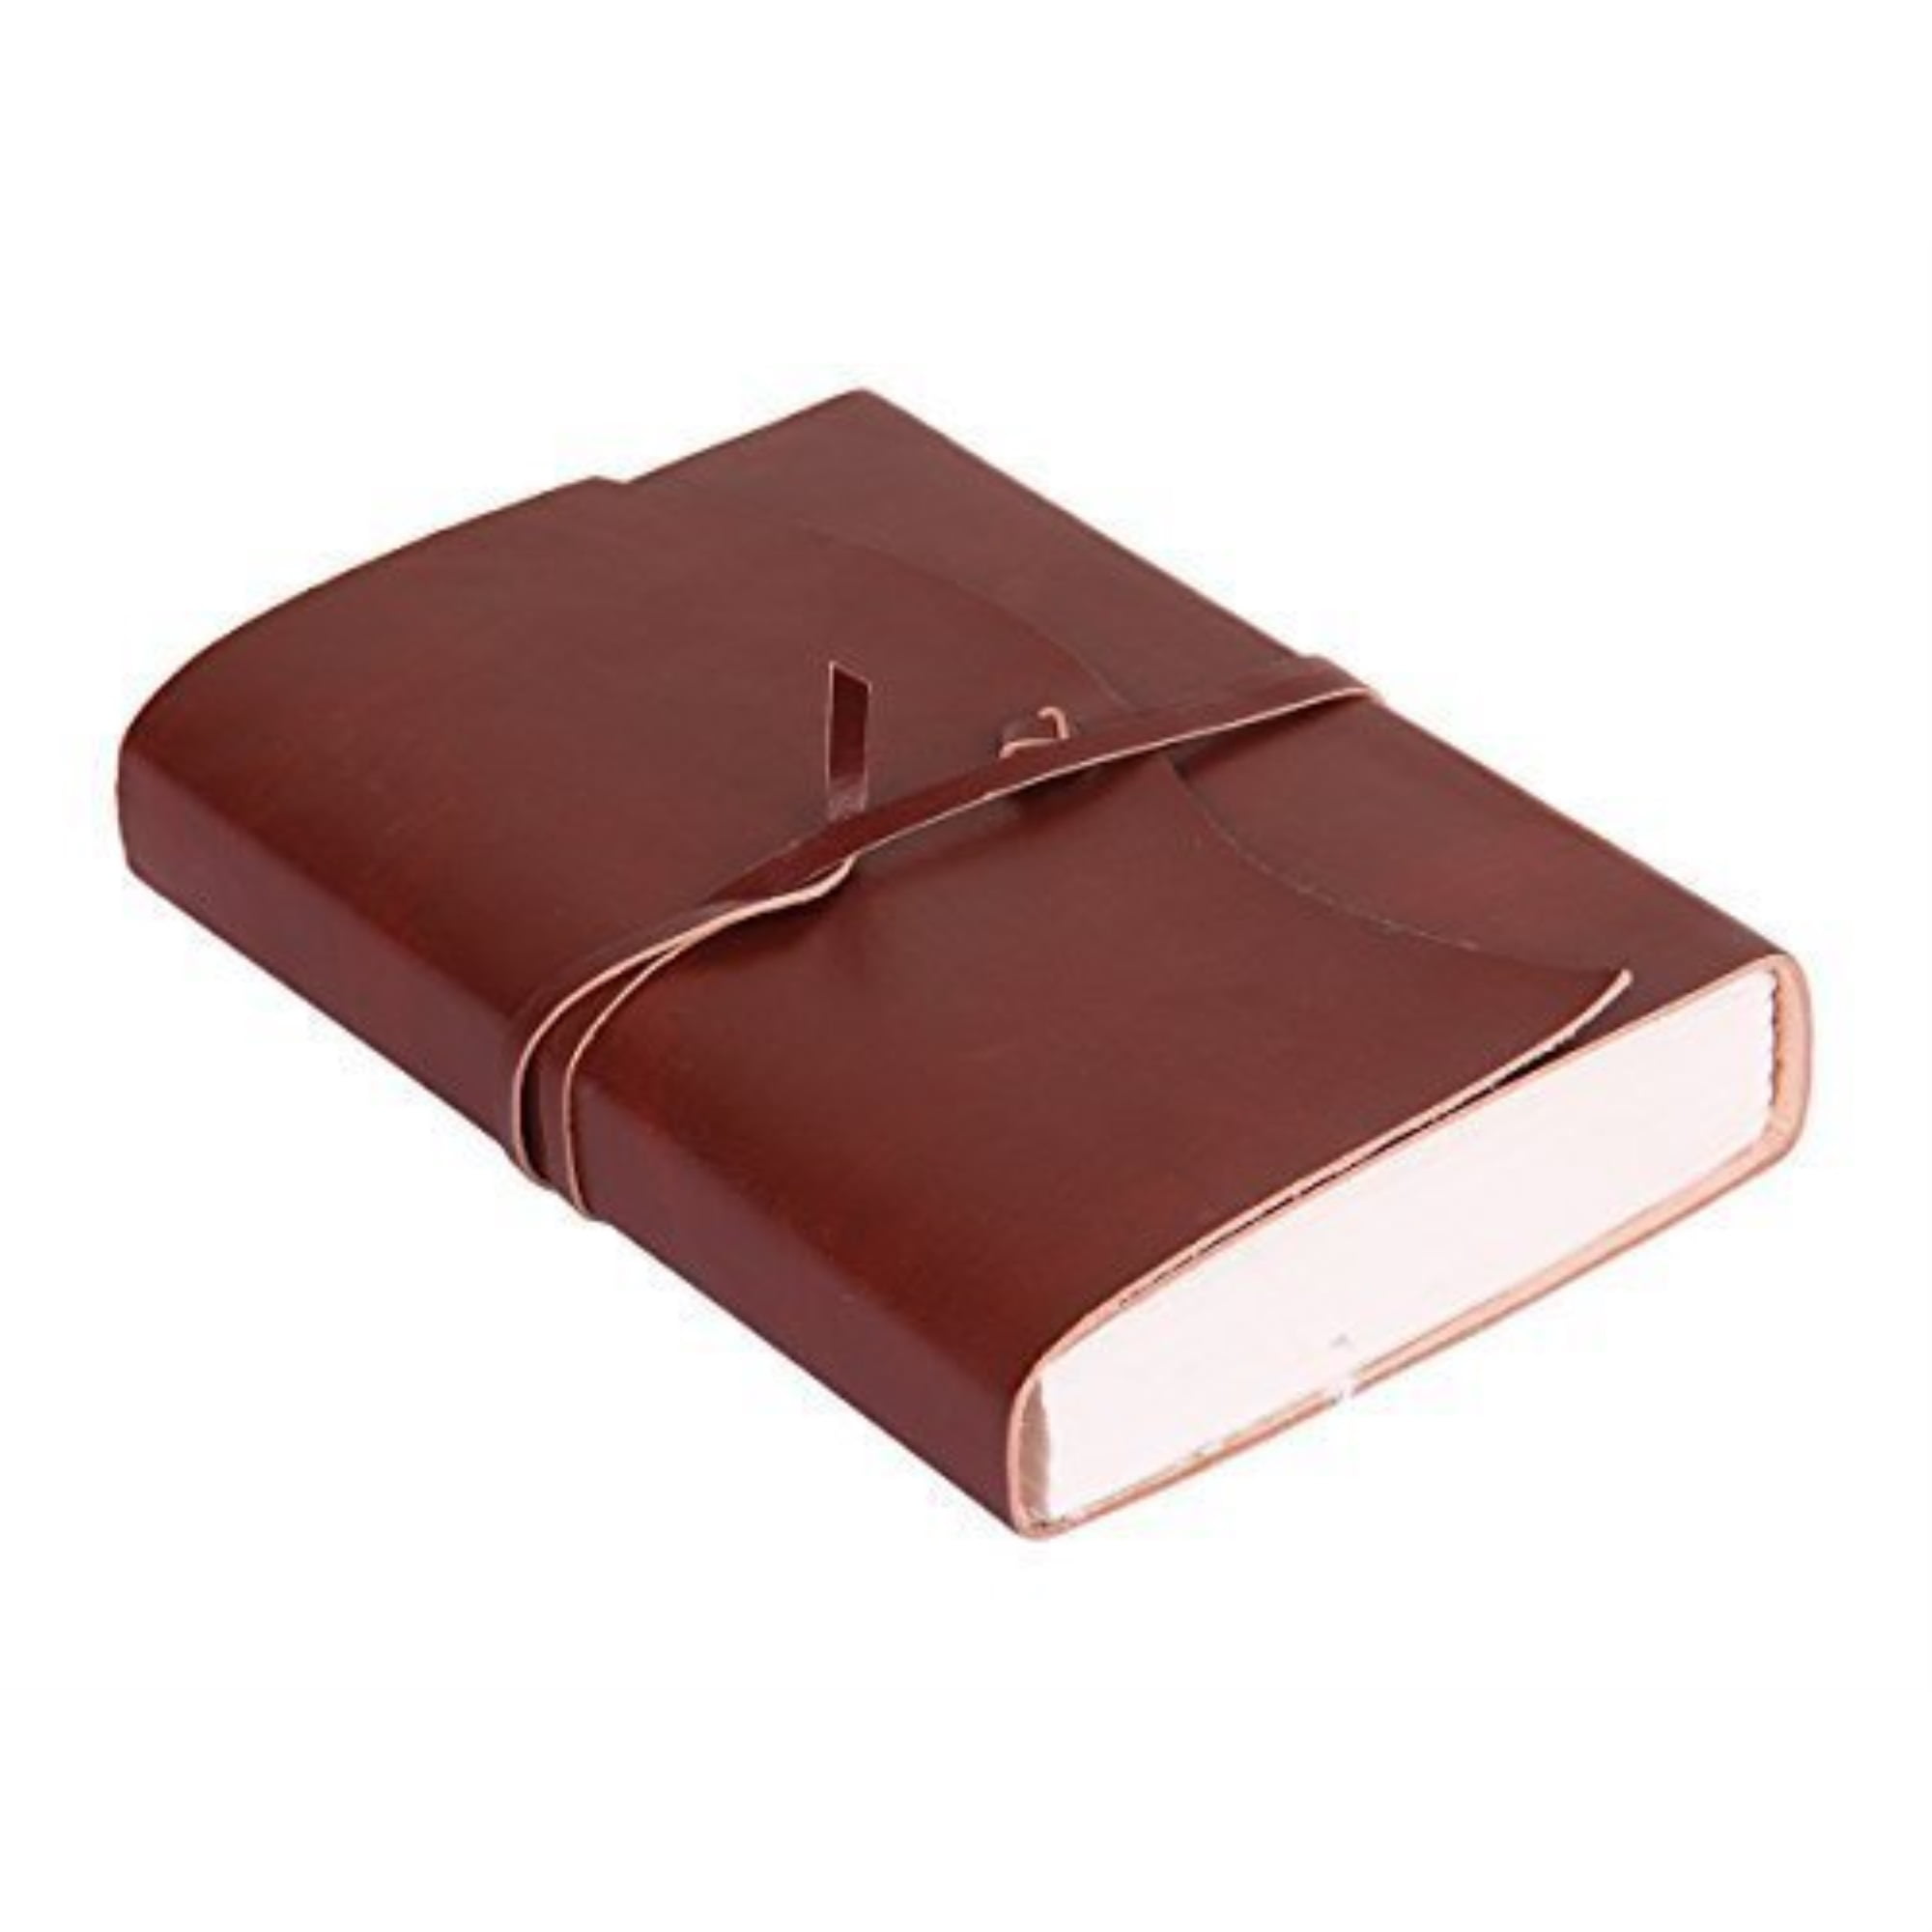 Leather Vintage Handmade Journal Diary with Lock 4.5 x 6 Inch US 